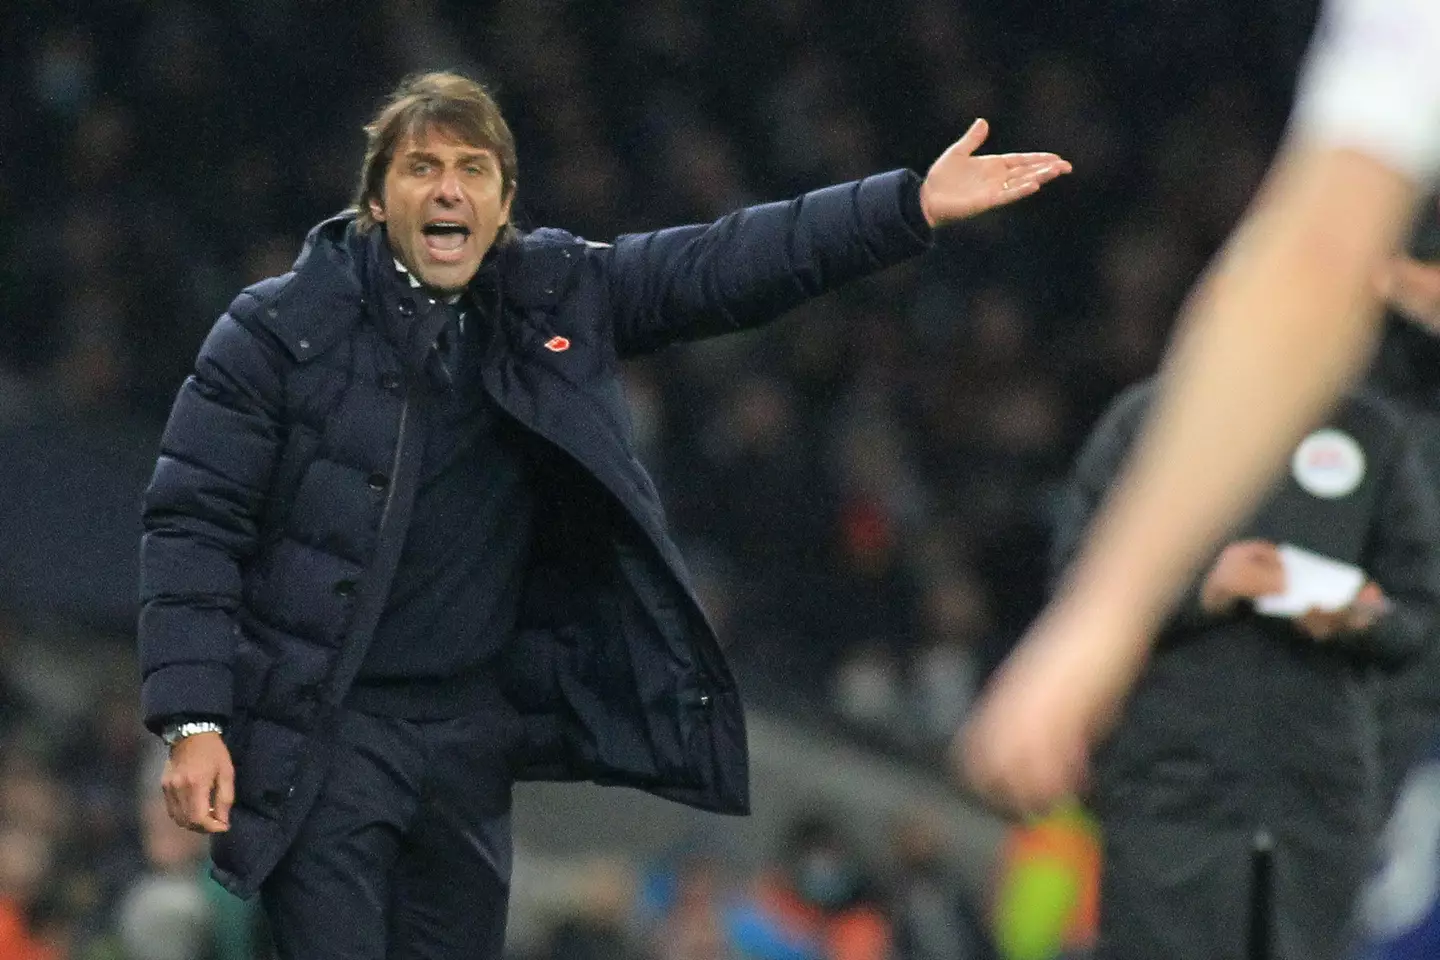 Conte isn't happy with UEFA. Image: PA Images